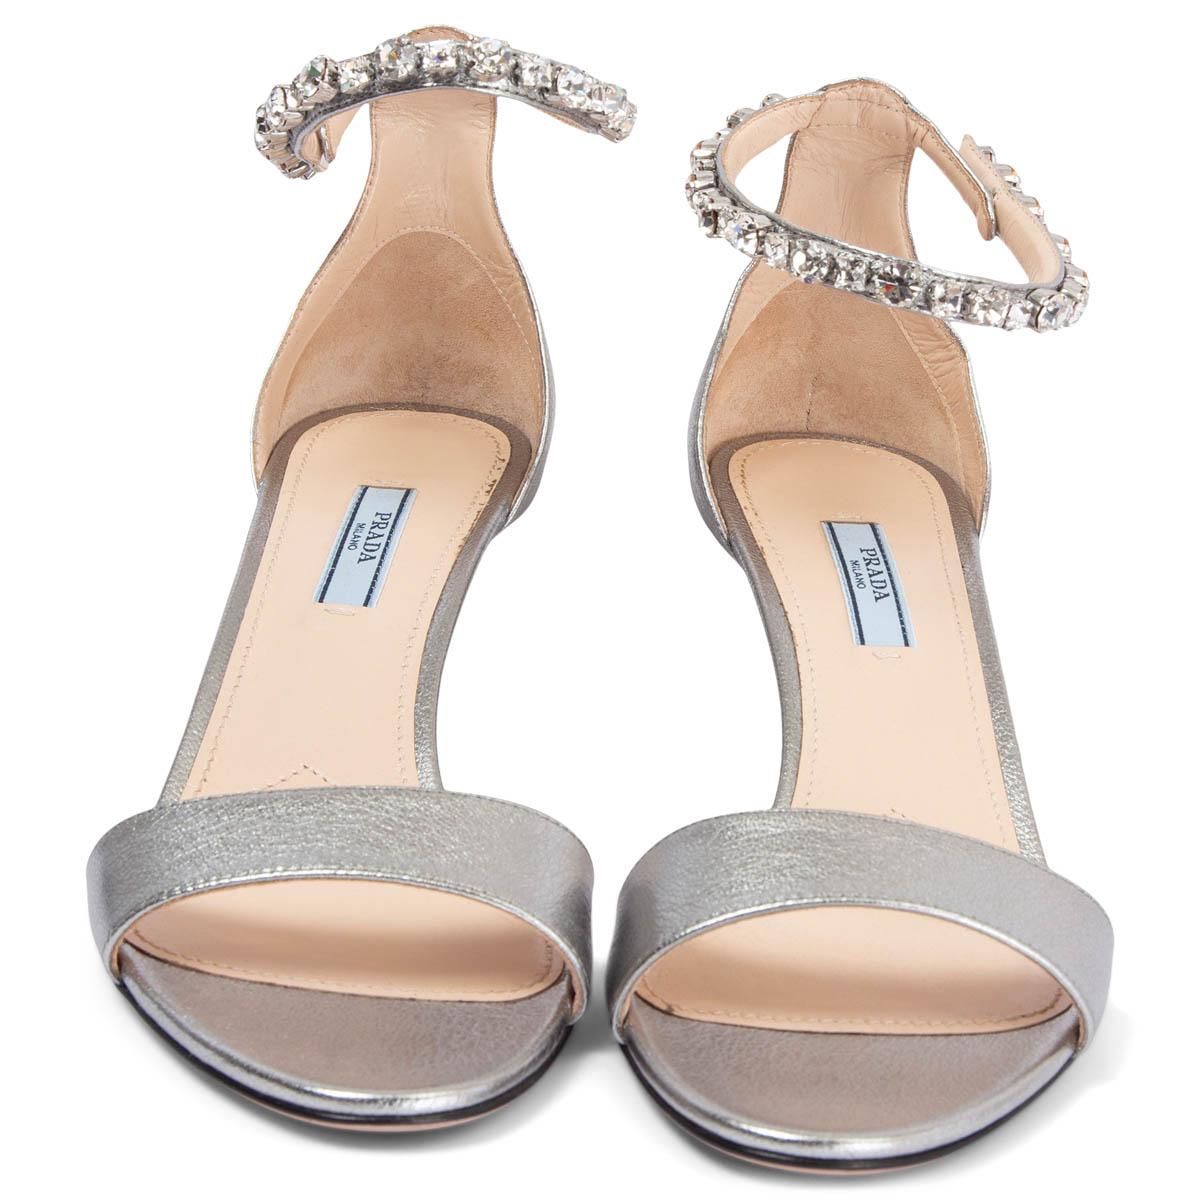 100% authentic Prada ankle-strap kitten heel sandals in silver calfskin embellished with clear crystals around the strap. Have been worn once and are in virtually new condition. 

Measurements
Imprinted Size	40
Shoe Size	40
Inside Sole	26.5cm